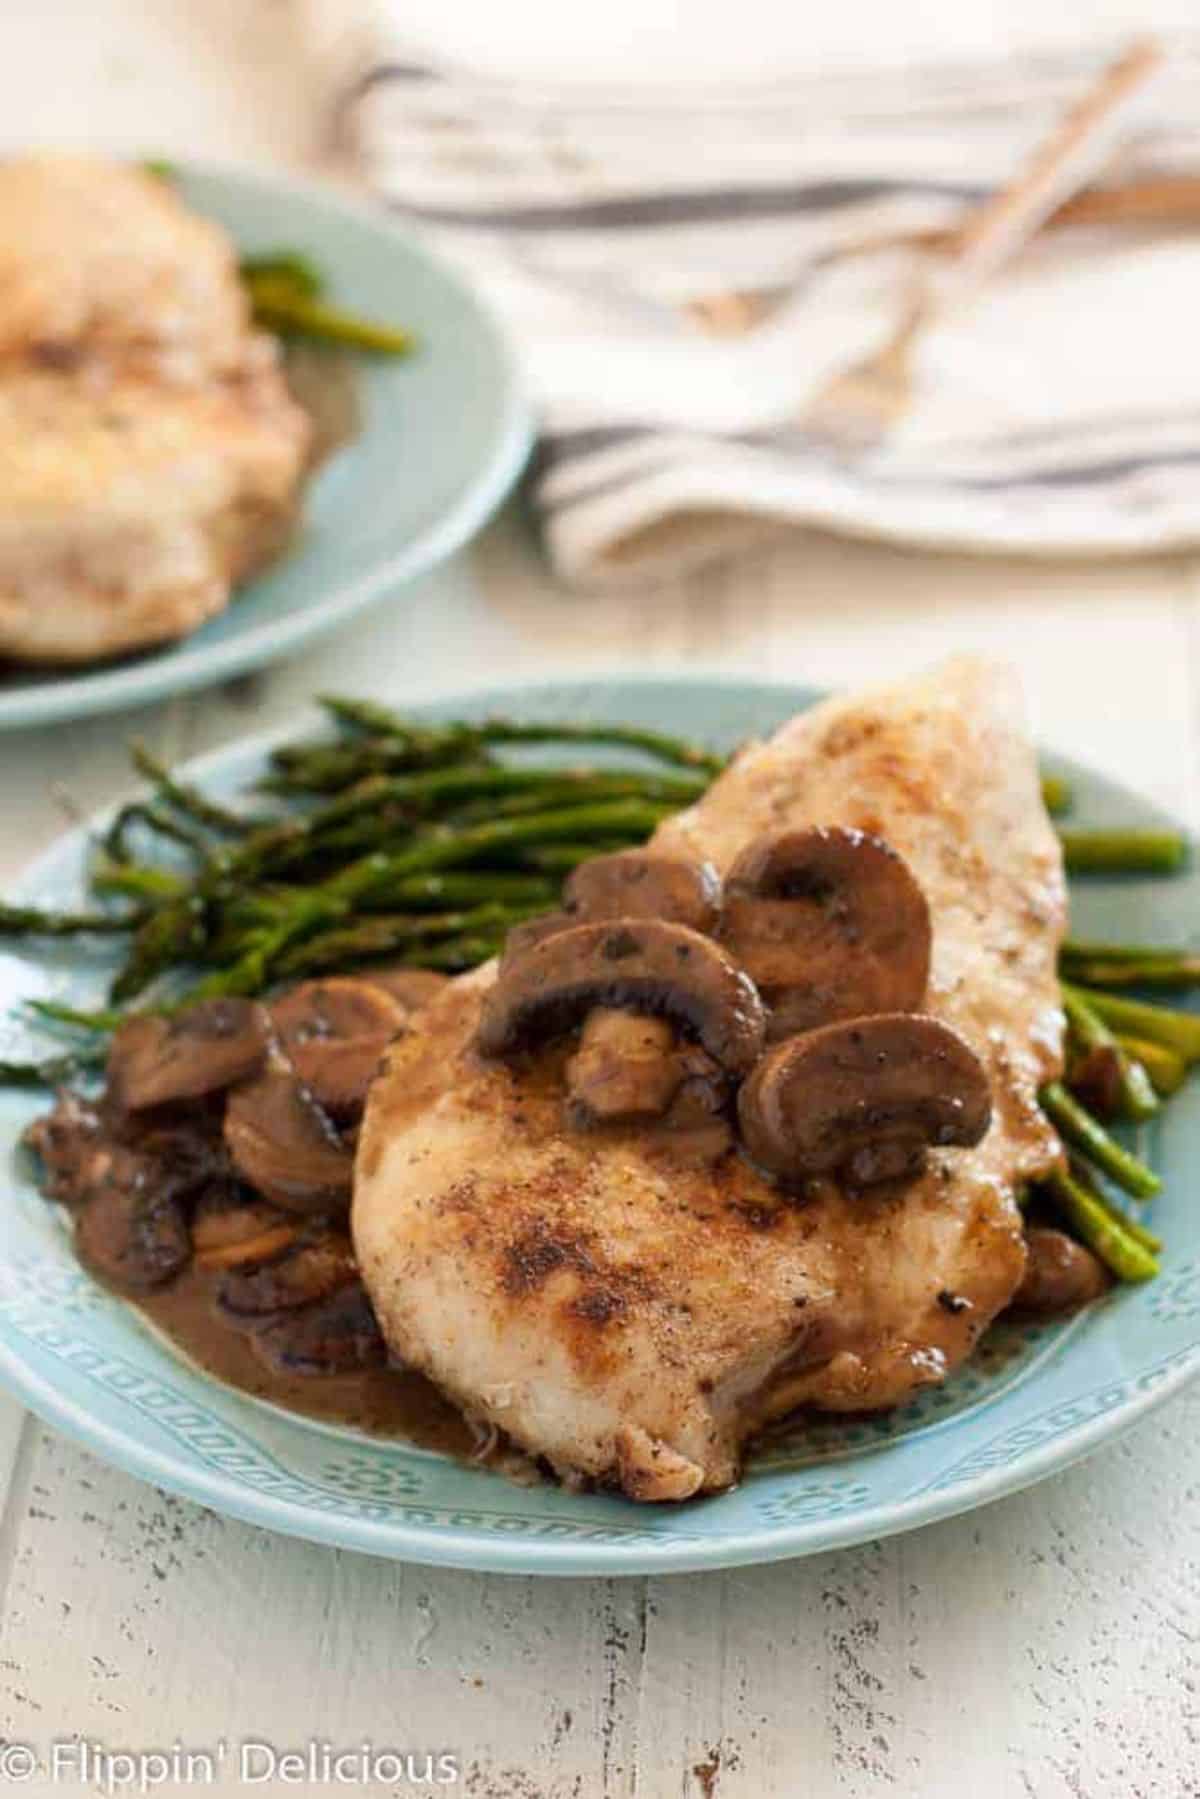 Scrumptious Gluten-Free Chicken Marsala with Mushrooms with asparagus on a blue plate.